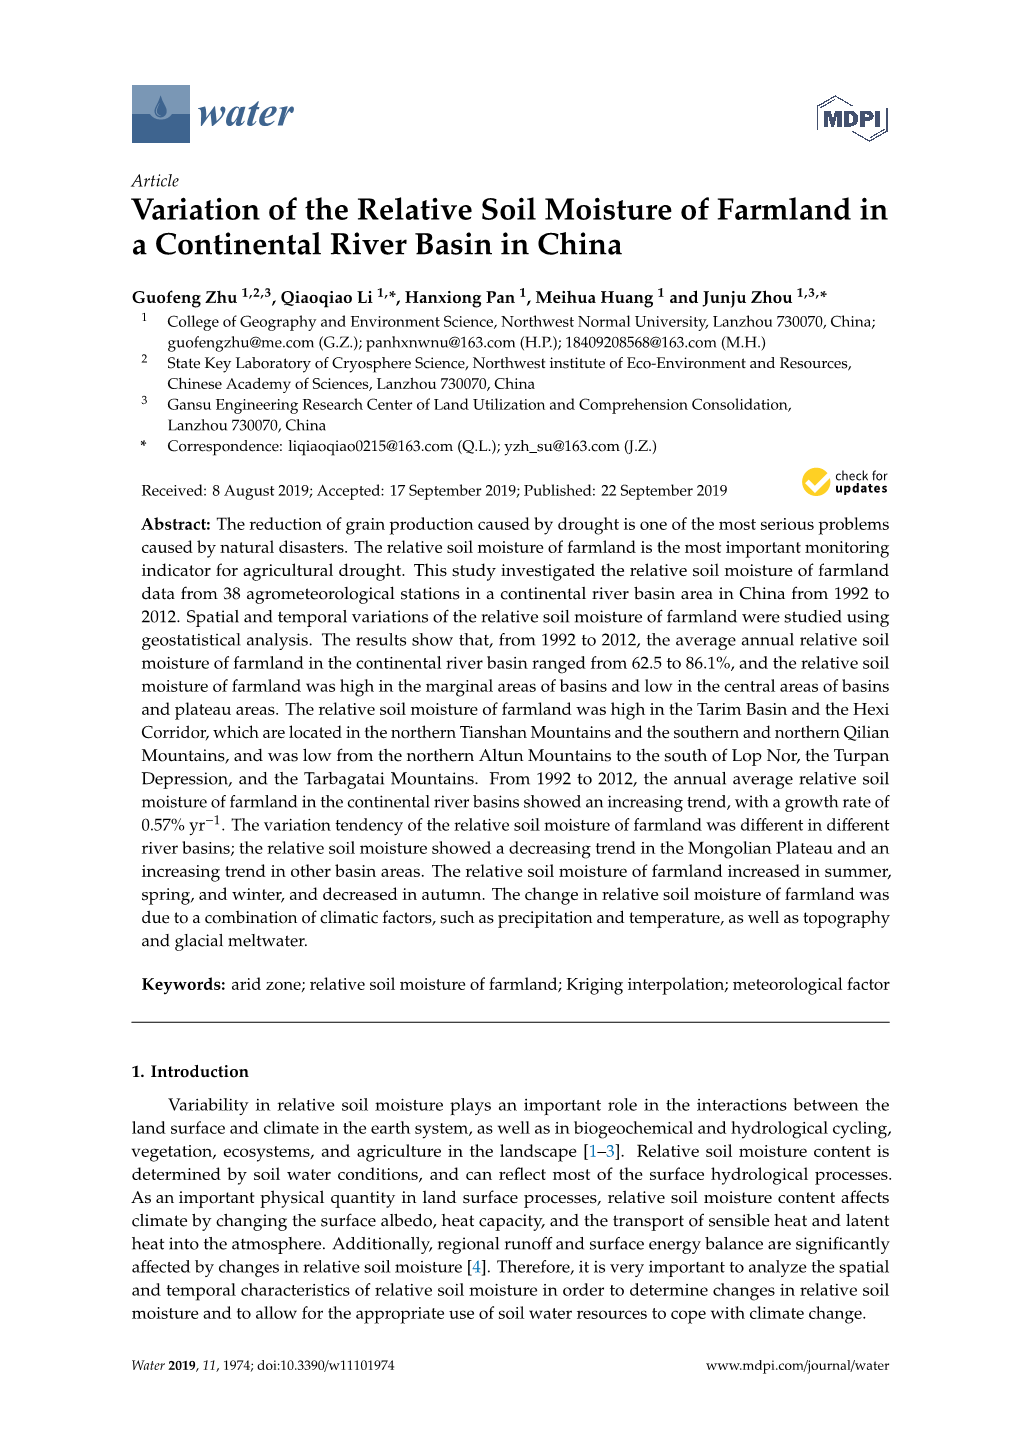 Variation of the Relative Soil Moisture of Farmland in a Continental River Basin in China